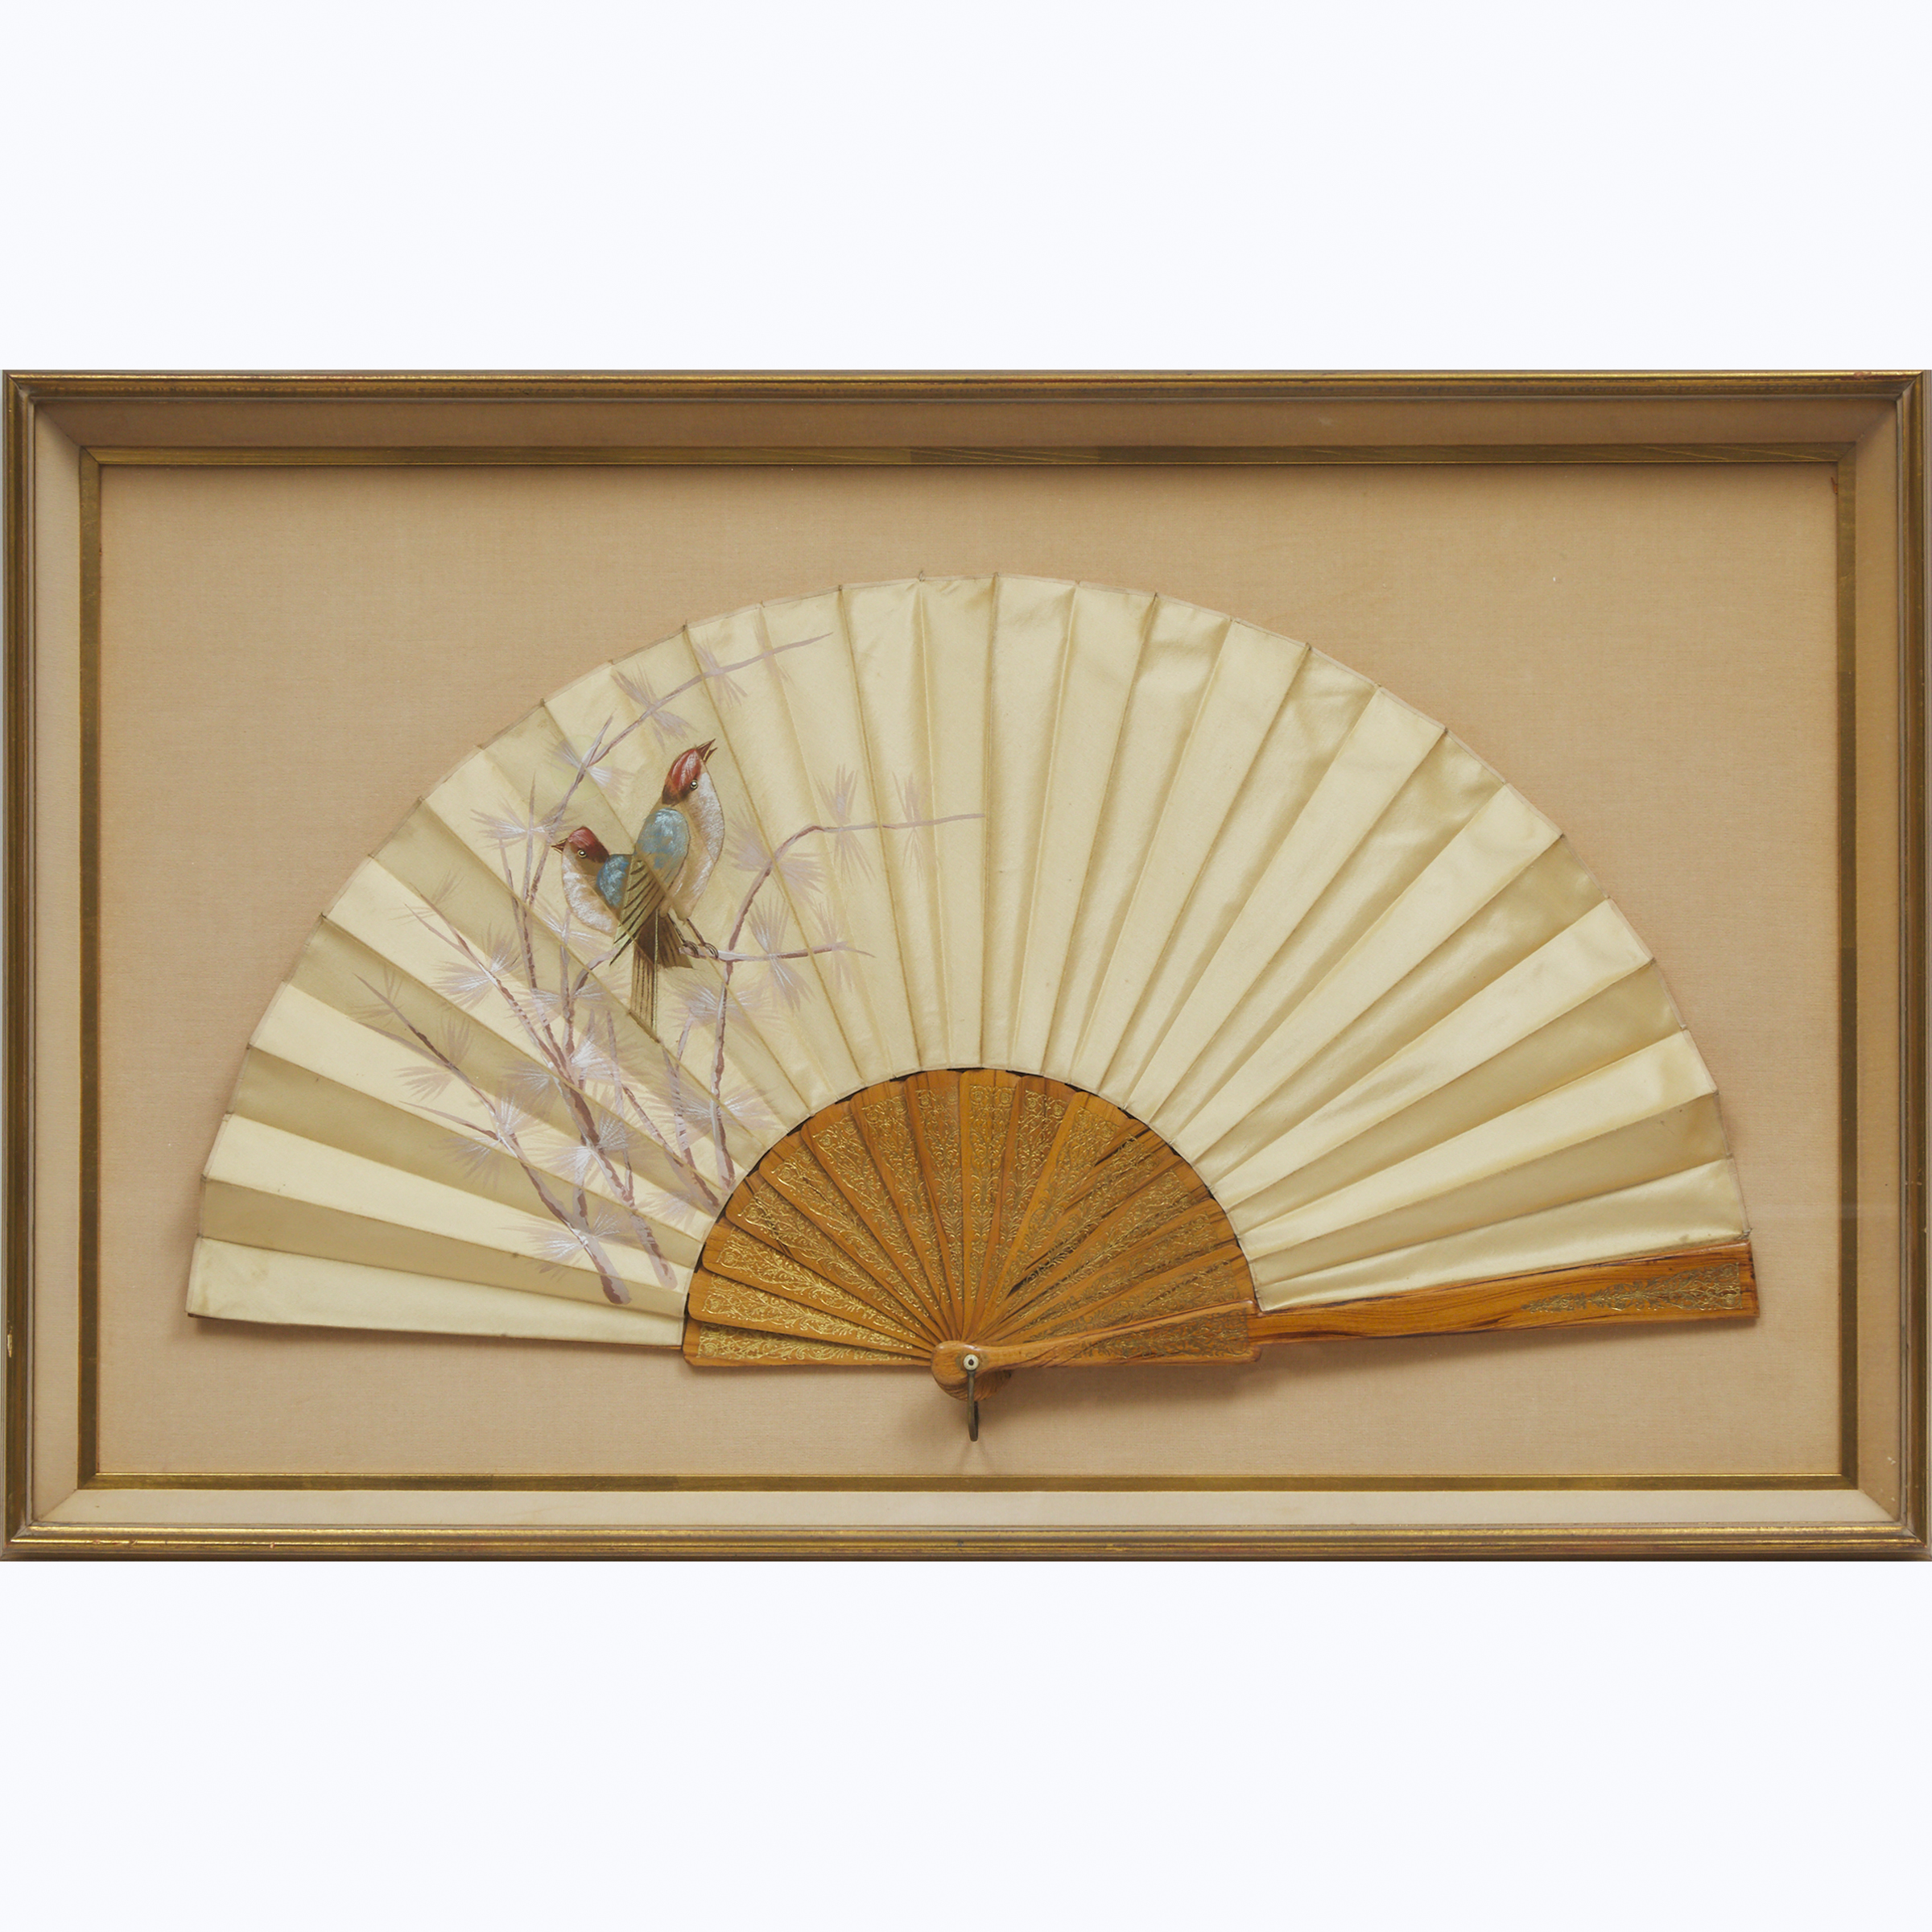 Frame Cased Large French Painted Silk Fan, mid 20th century